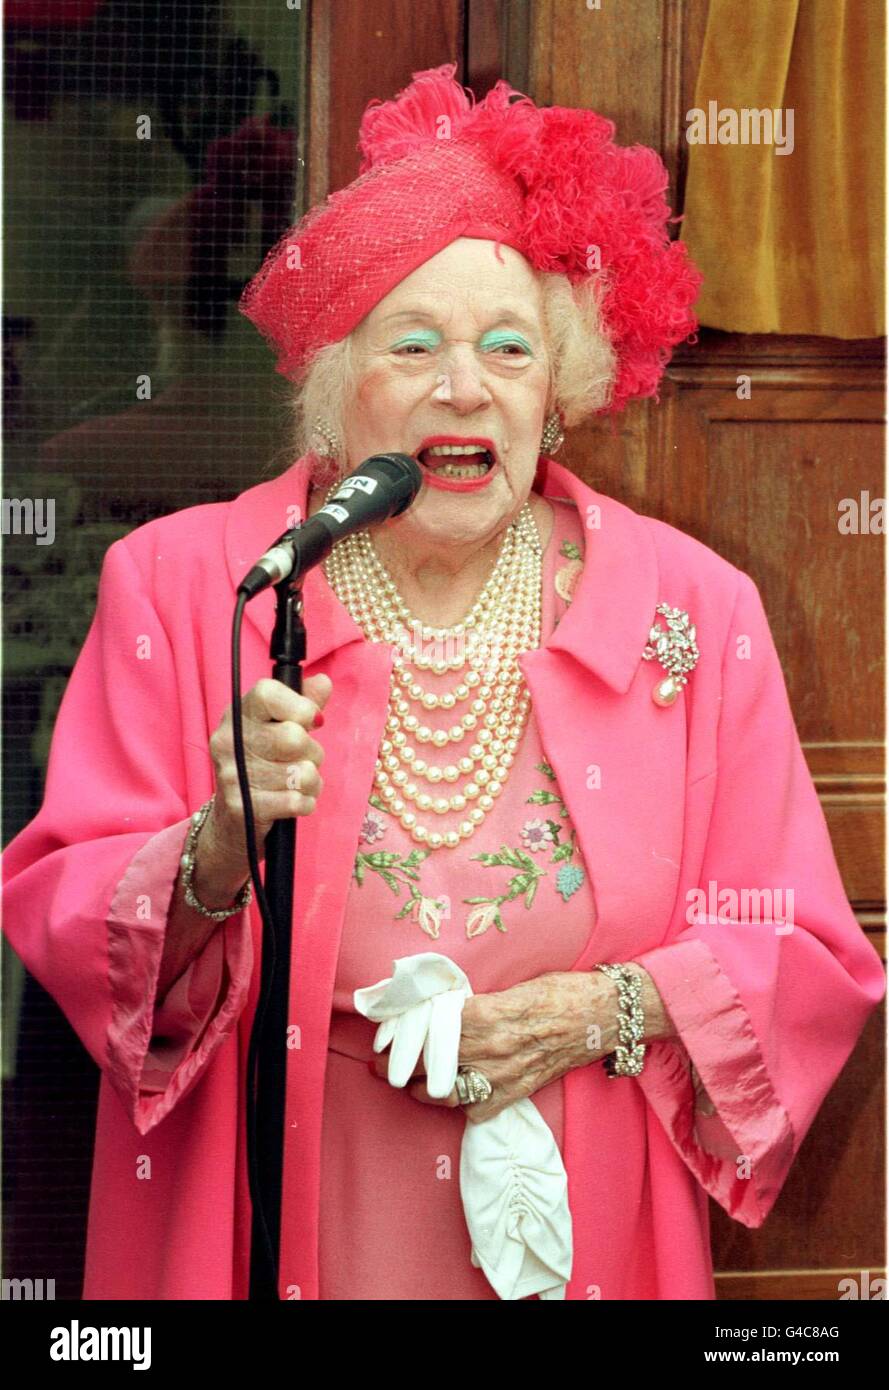 Romantic novelist, Dame Barbara Cartland, 97, speaks at the opening of 'The Pink Room' - an exhibition about herself created old friend Eric St John Forti at Heritage Hall in Downham Market in Norfolk today (Wednesday). Photo by Findlay Kember/PA Stock Photo